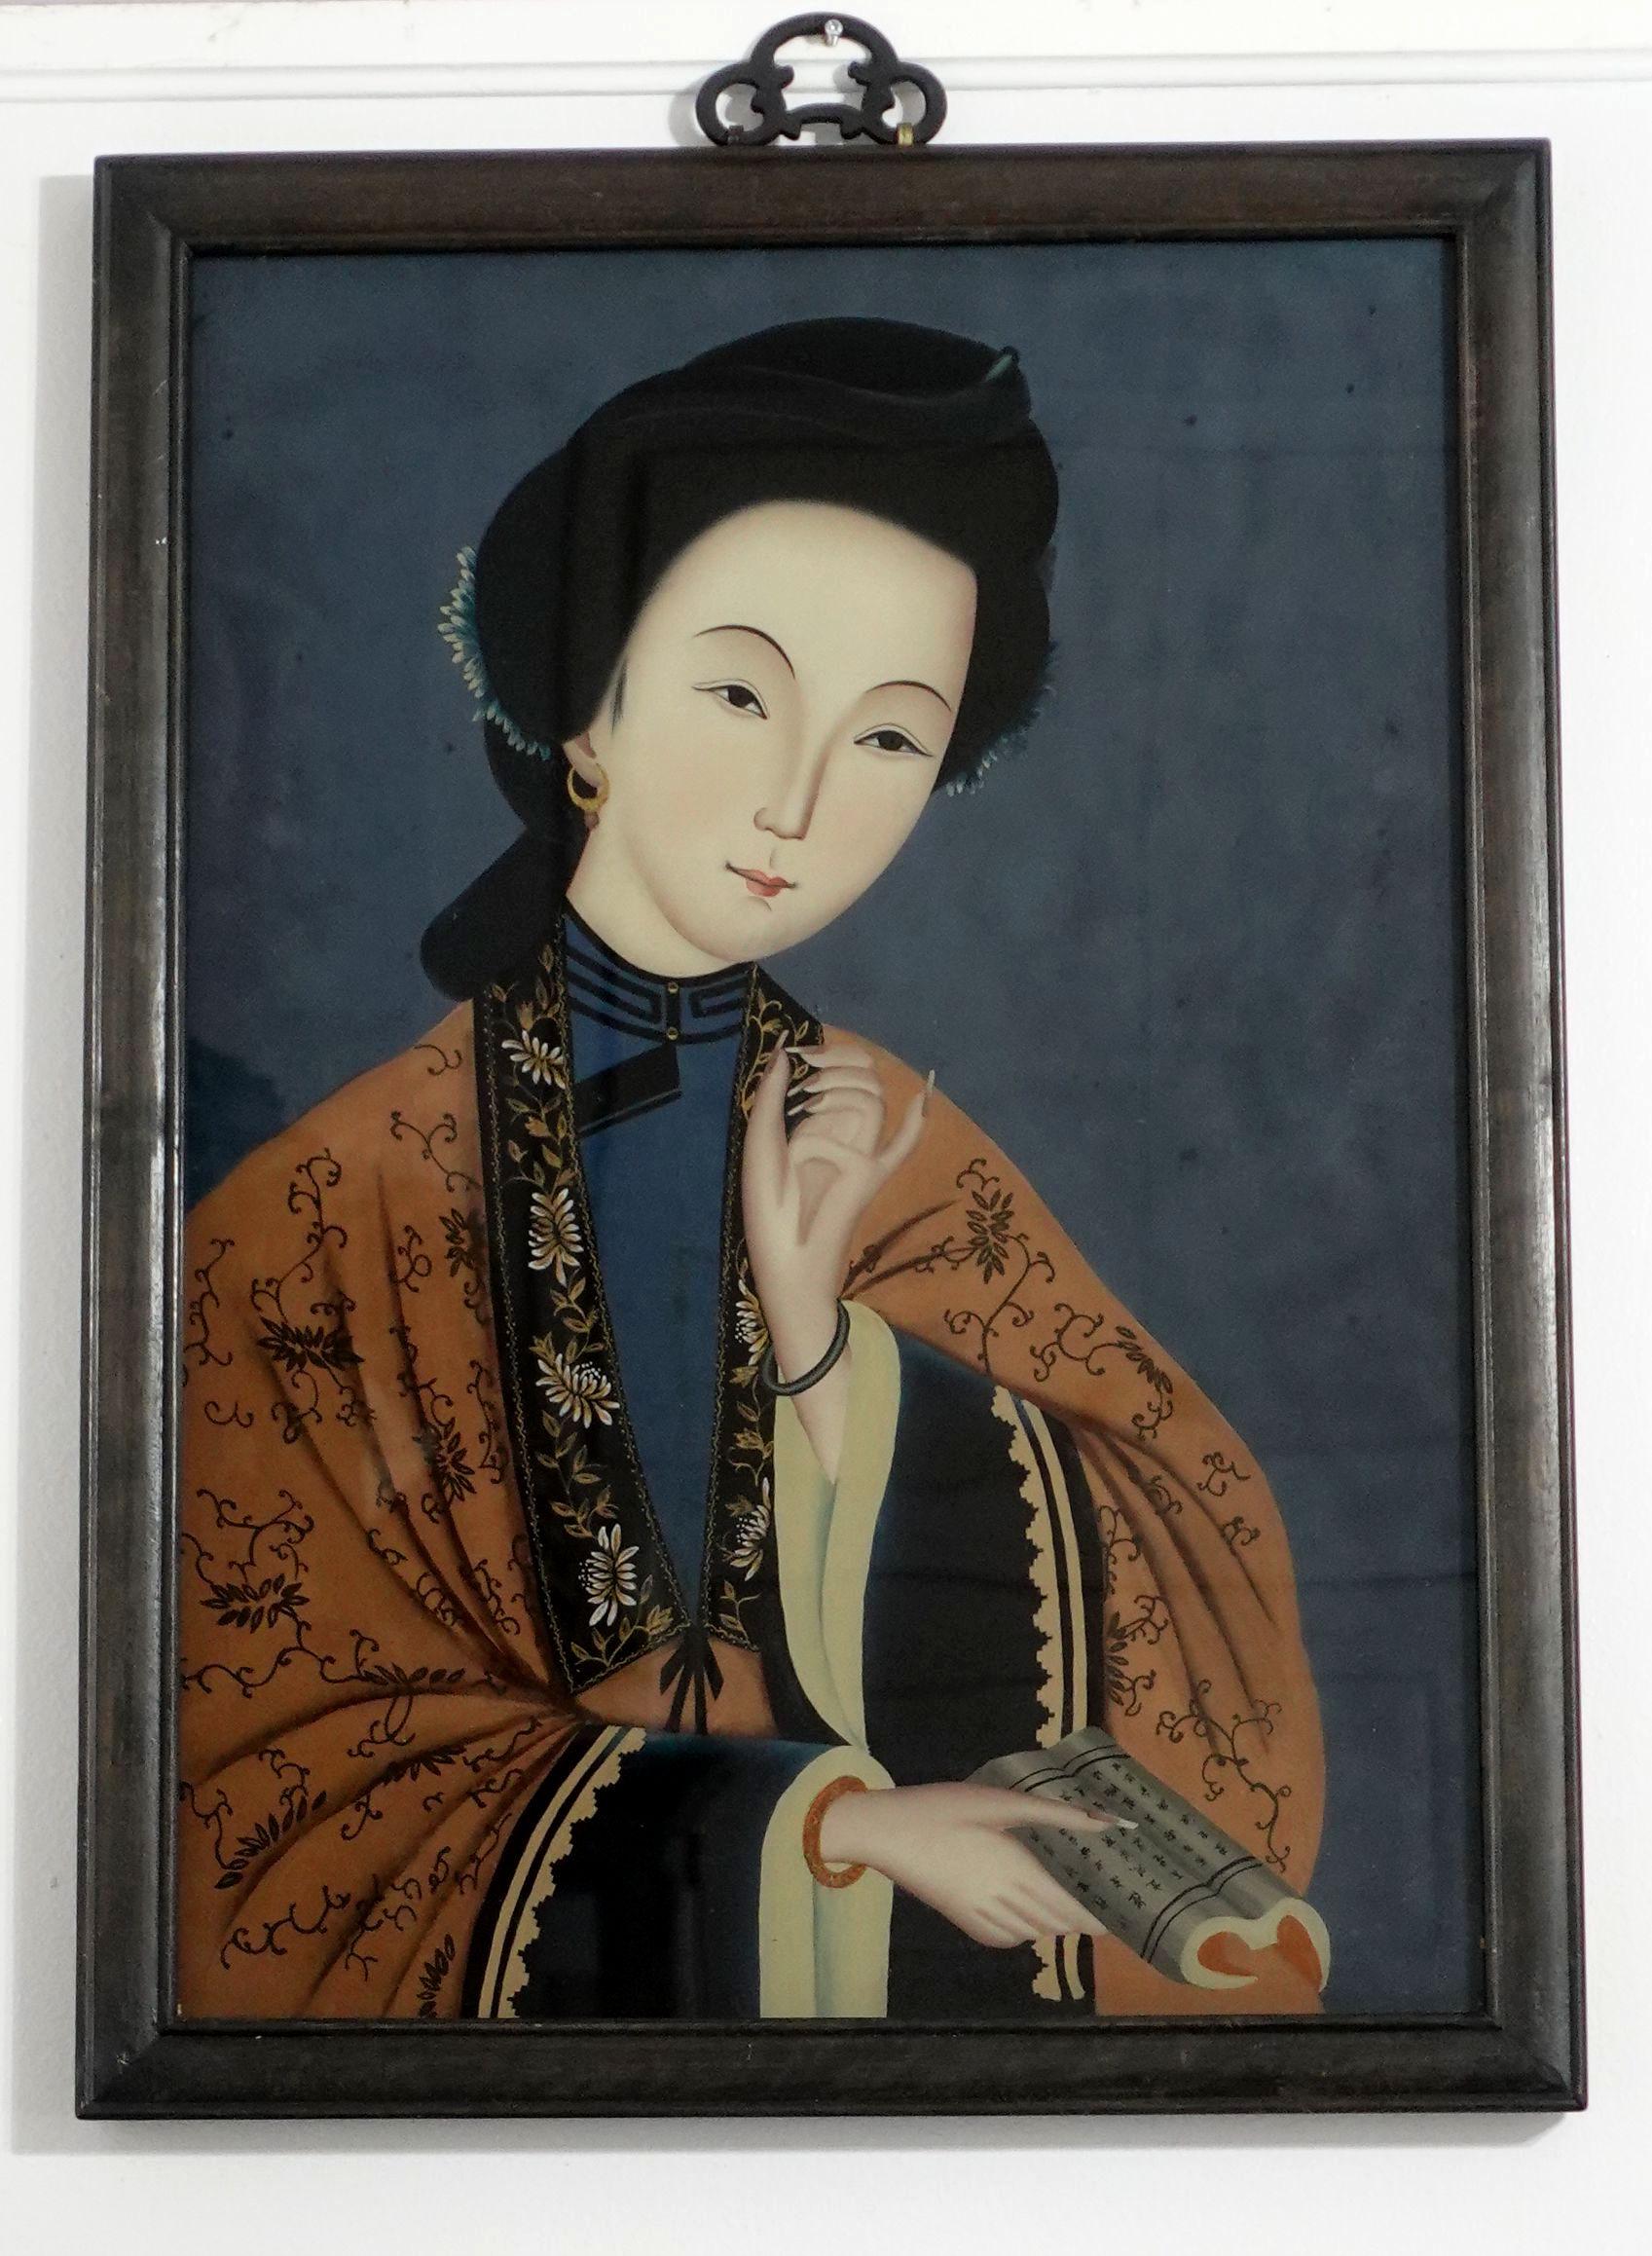 Large charming 19th-century Chinese export reverse glass painting, depicting the beauty of traditional Chinese customs and clothing decorations on the noblewomen. The paintings come with their original hardwood frame and the old pins in the back of